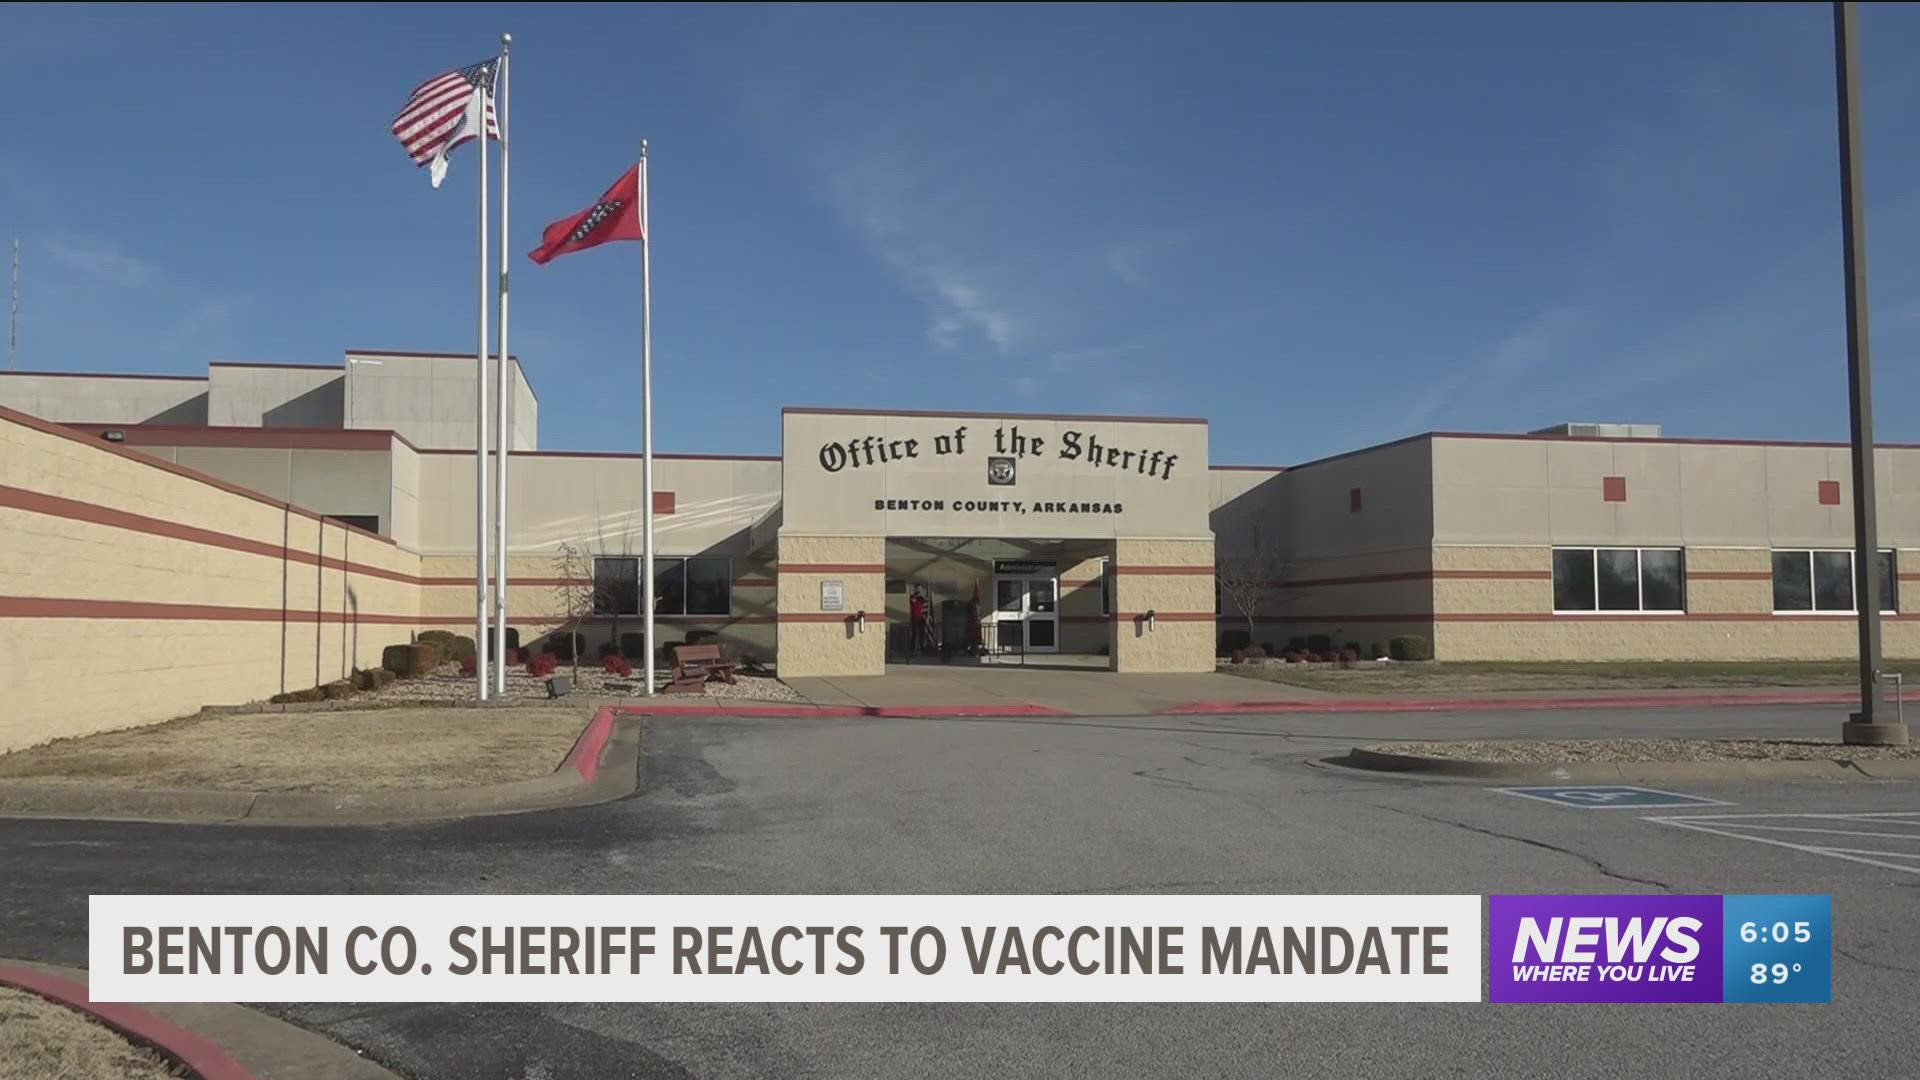 The Sheriff's Office's press release says that it will not enforce vaccine mandates on its employees or residents of Benton Co.